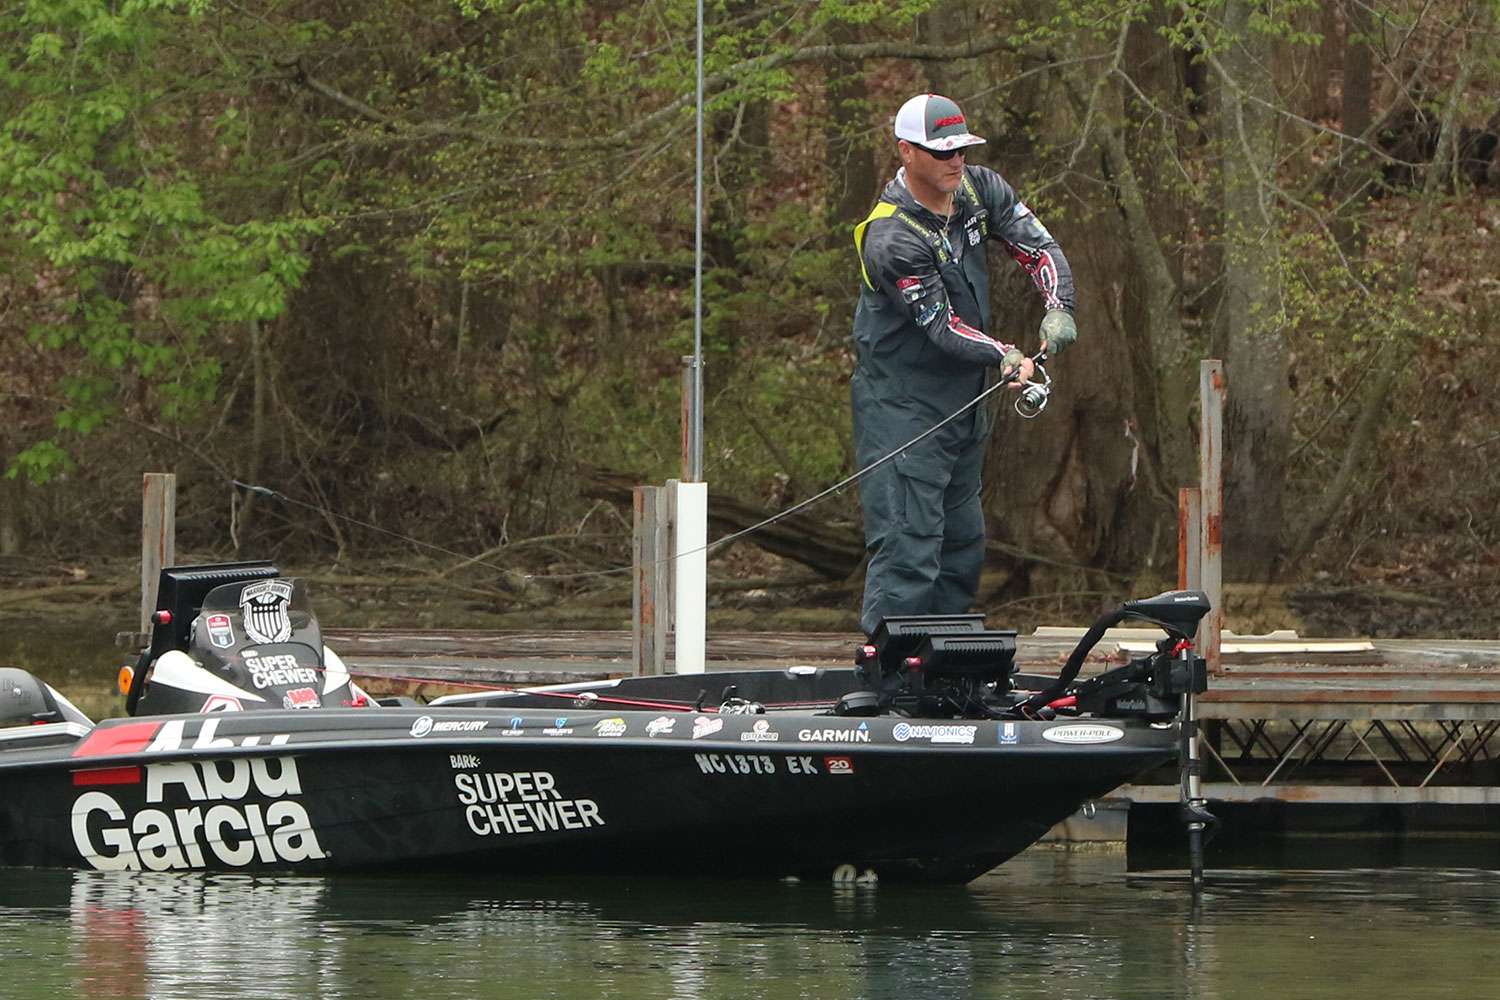 Hank Cherry took advantage of some bedded bass on the final day of the 2019 Bassmaster Elite at Lake Hartwell.